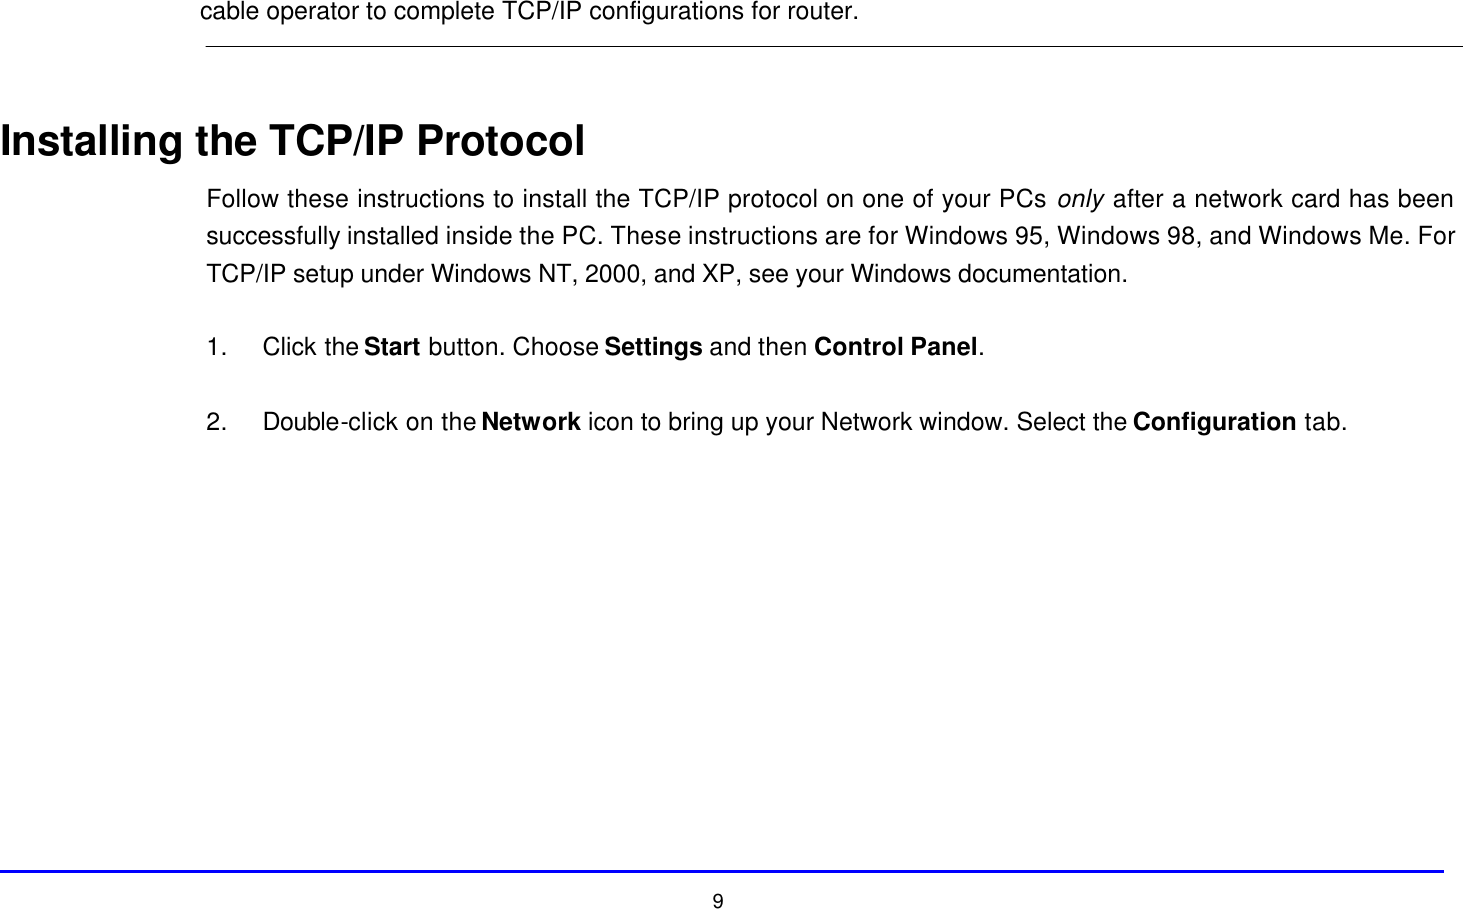  9 cable operator to complete TCP/IP configurations for router.   Installing the TCP/IP Protocol Follow these instructions to install the TCP/IP protocol on one of your PCs only after a network card has been successfully installed inside the PC. These instructions are for Windows 95, Windows 98, and Windows Me. For TCP/IP setup under Windows NT, 2000, and XP, see your Windows documentation.  1. Click the Start button. Choose Settings and then Control Panel.  2. Double-click on the Network icon to bring up your Network window. Select the Configuration tab.  